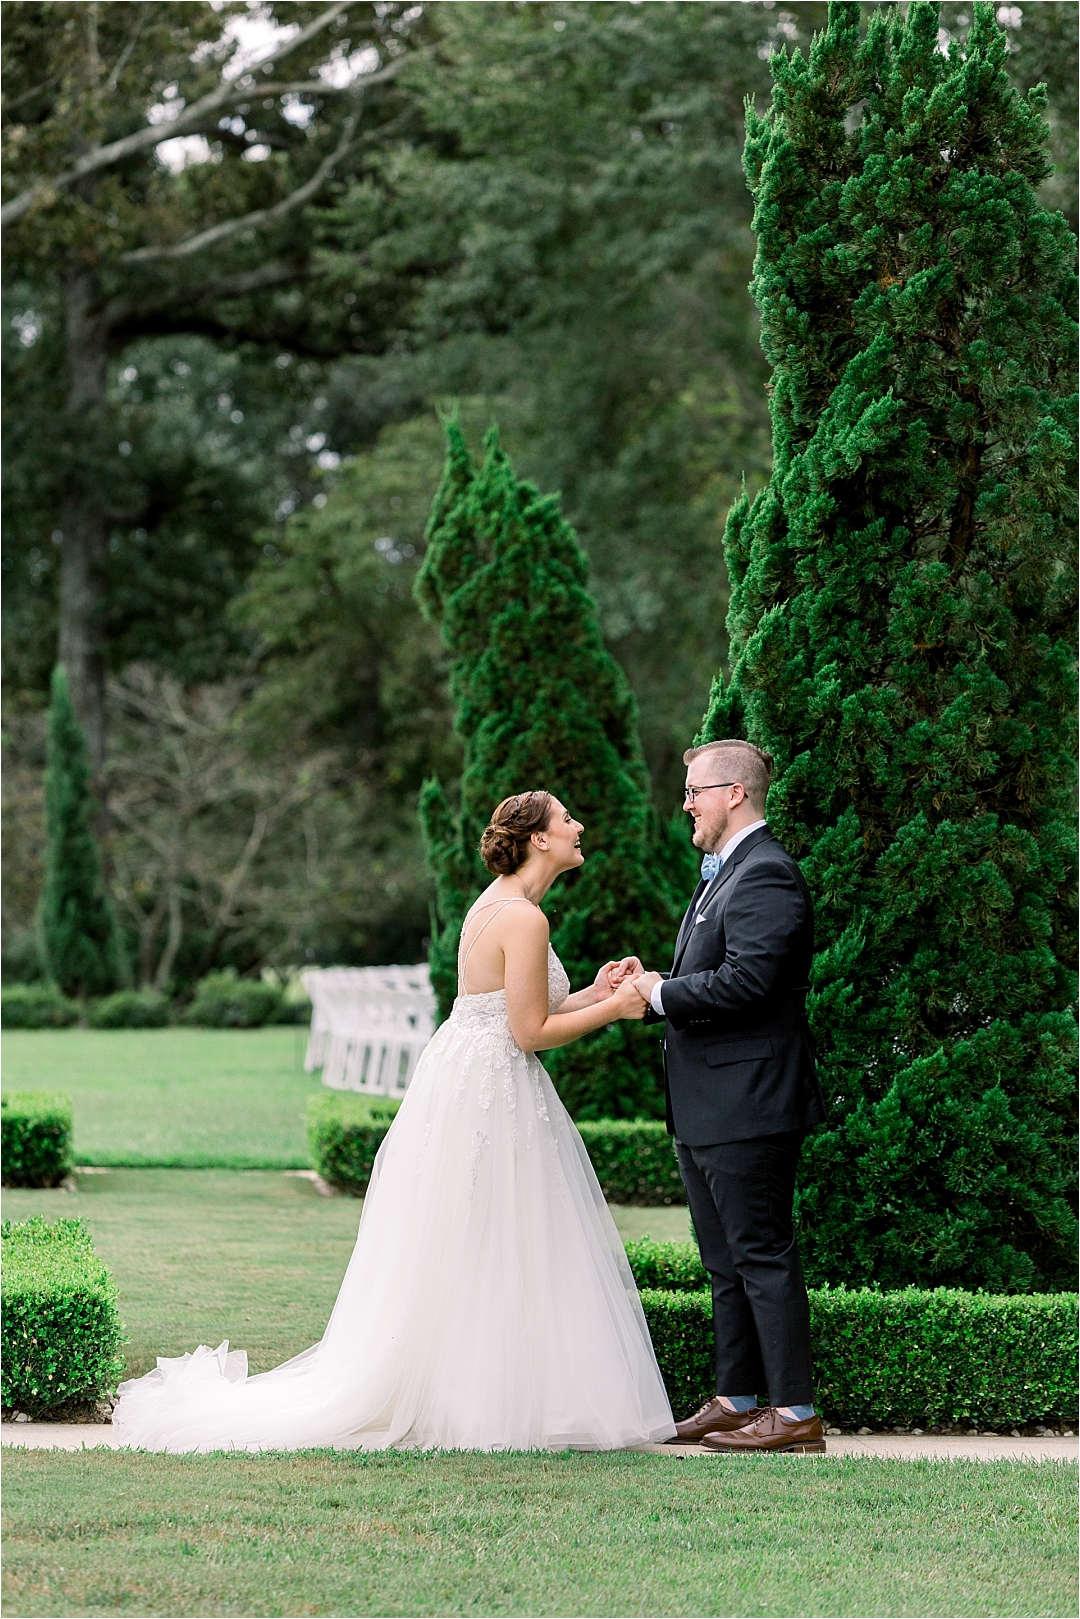 bride and groom first look)Photos by Leigh Wolfe, Atlanta's Top Wedding Photographer